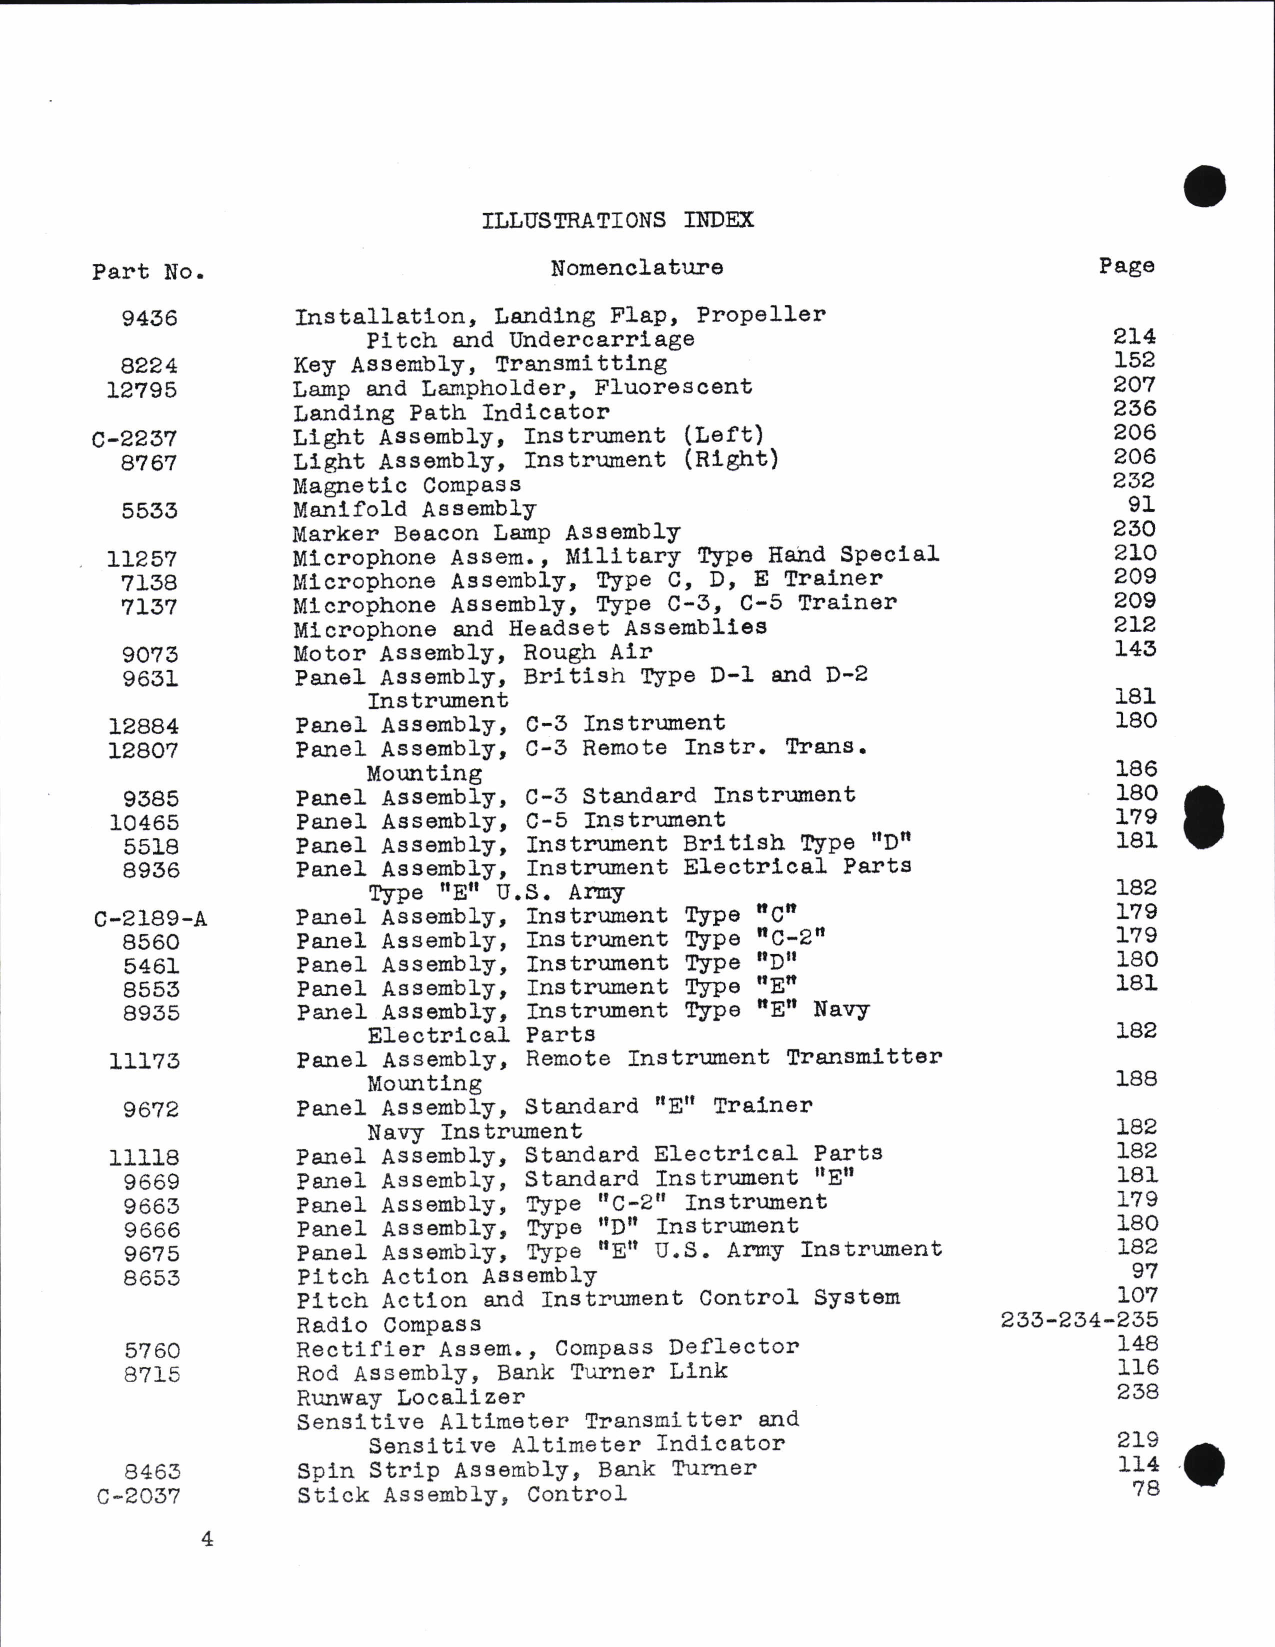 Sample page 8 from AirCorps Library document: Illustrated Parts Catalog for Link Instrument Flying Trainers